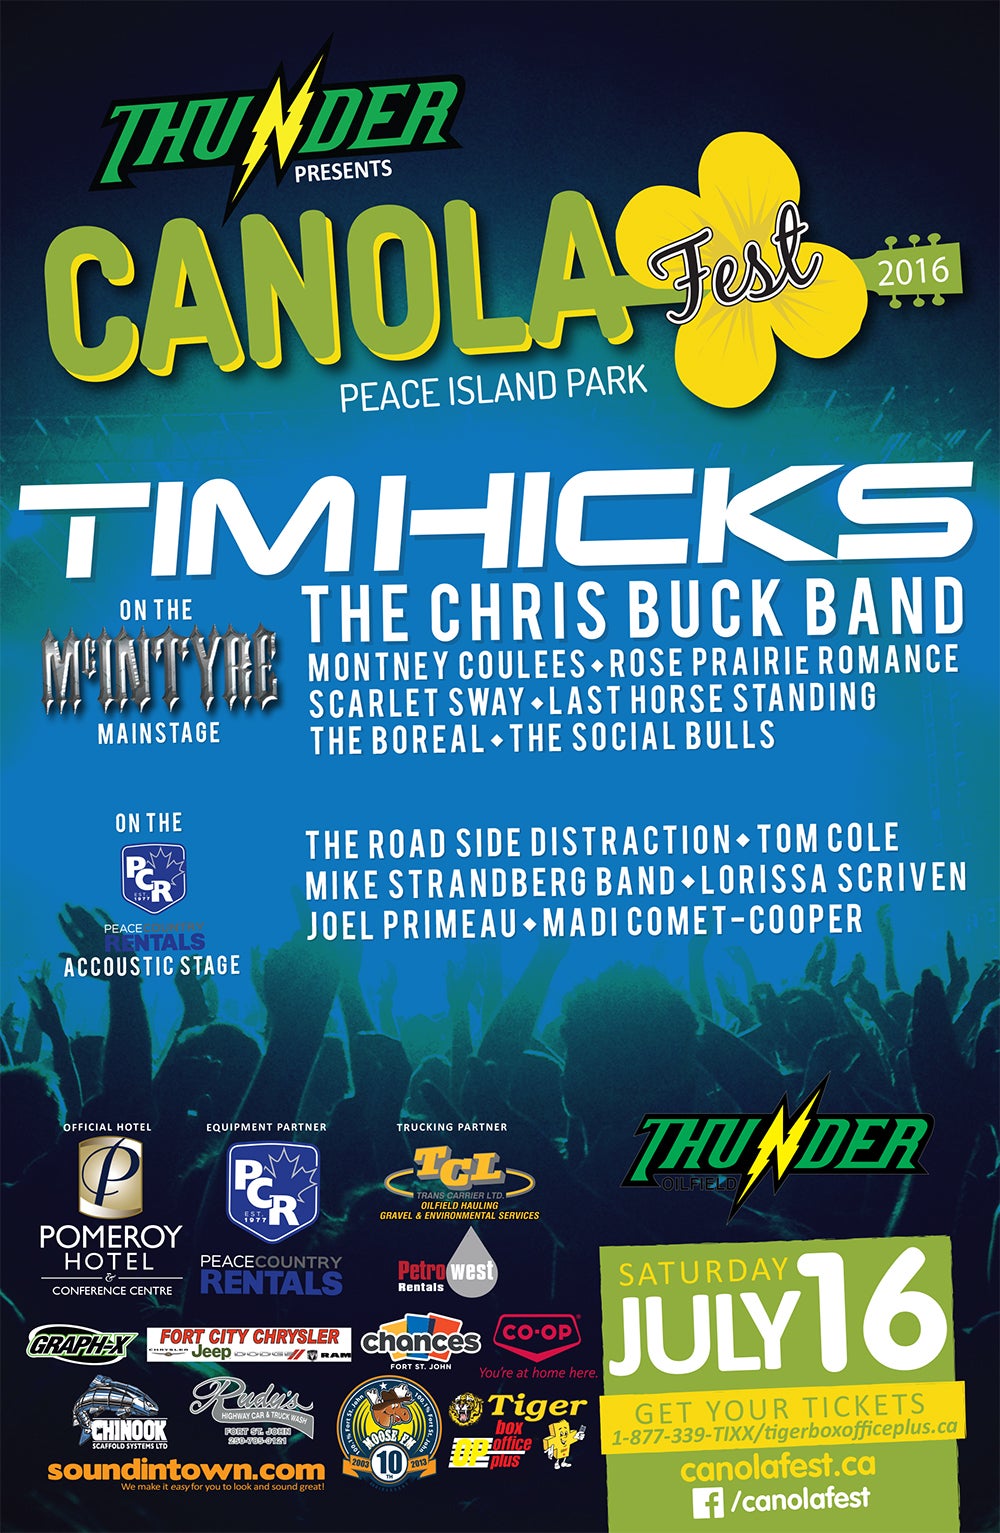 canolafest-2016-C-poster-11x17-w-logo-EMBEDDED-WITHSPONSORS-localbands.jpg